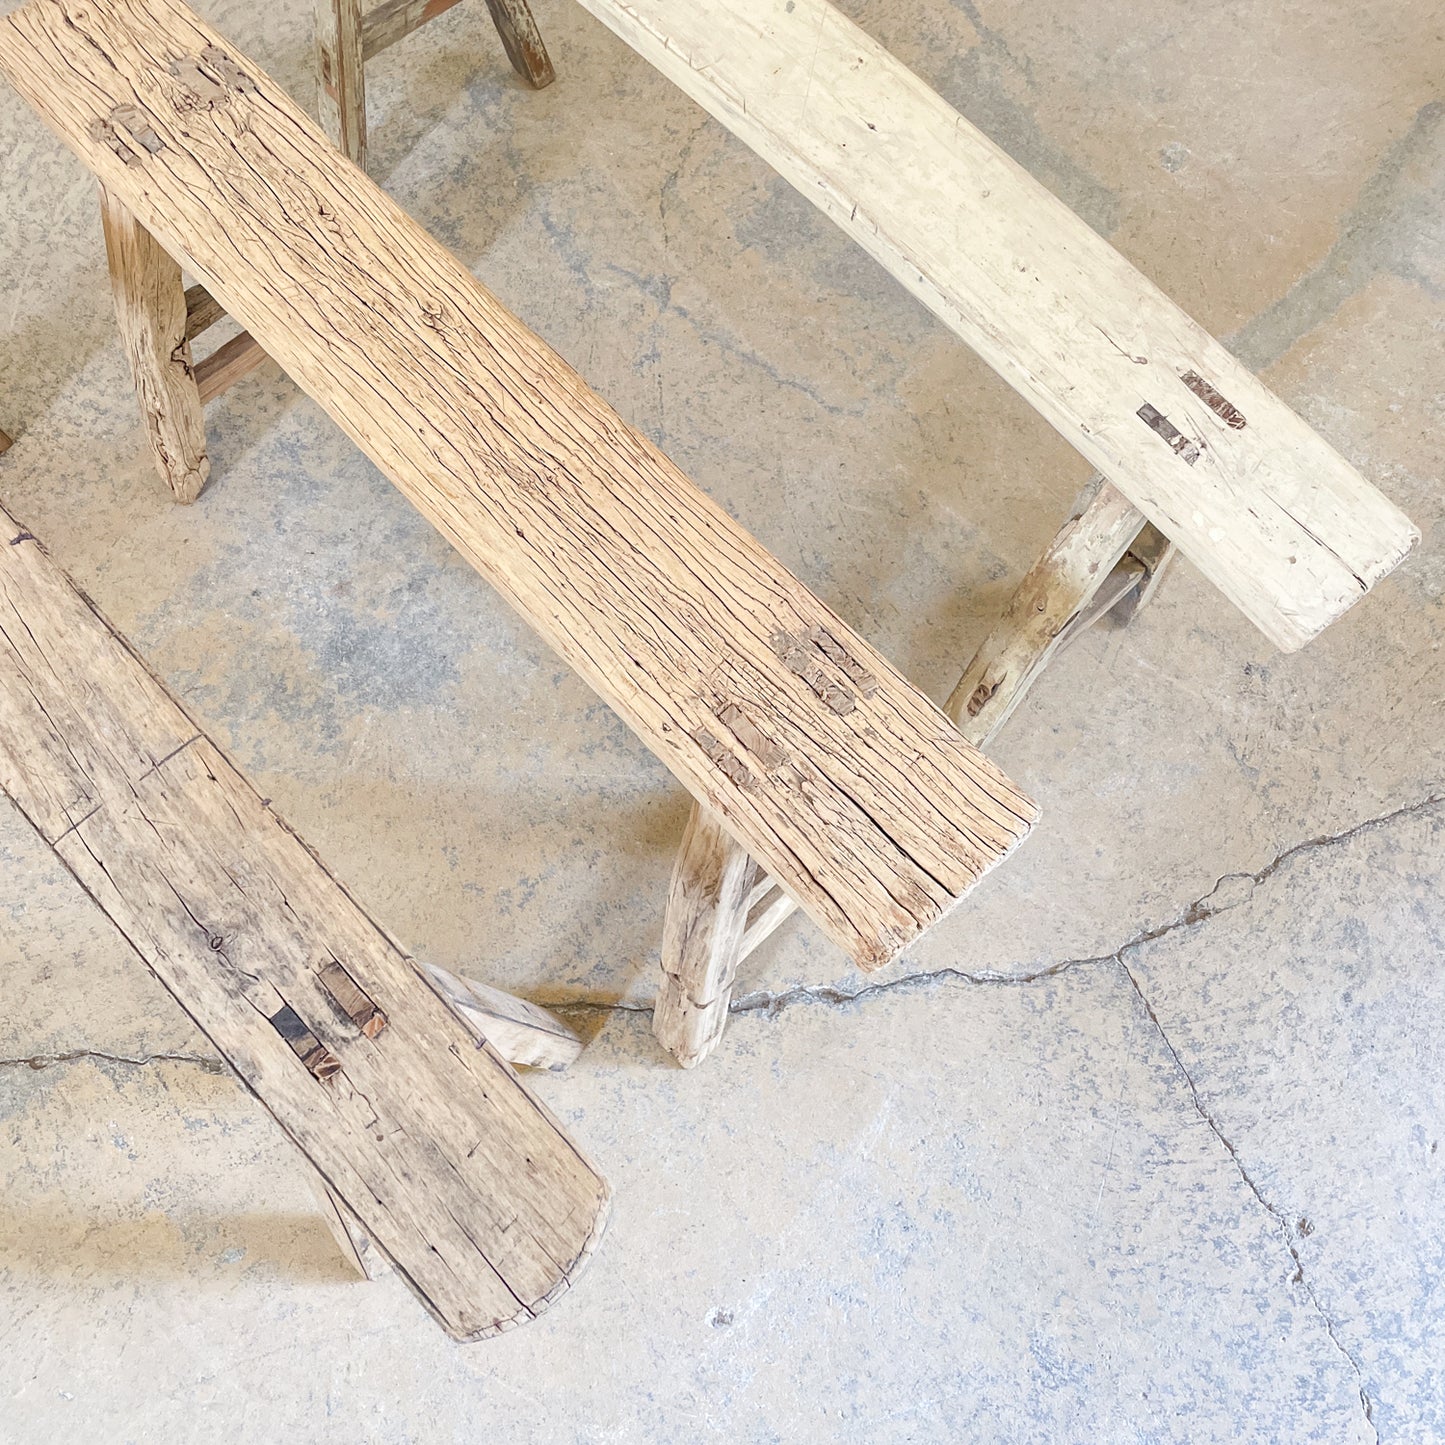 Rustic Asian Noodle Benches